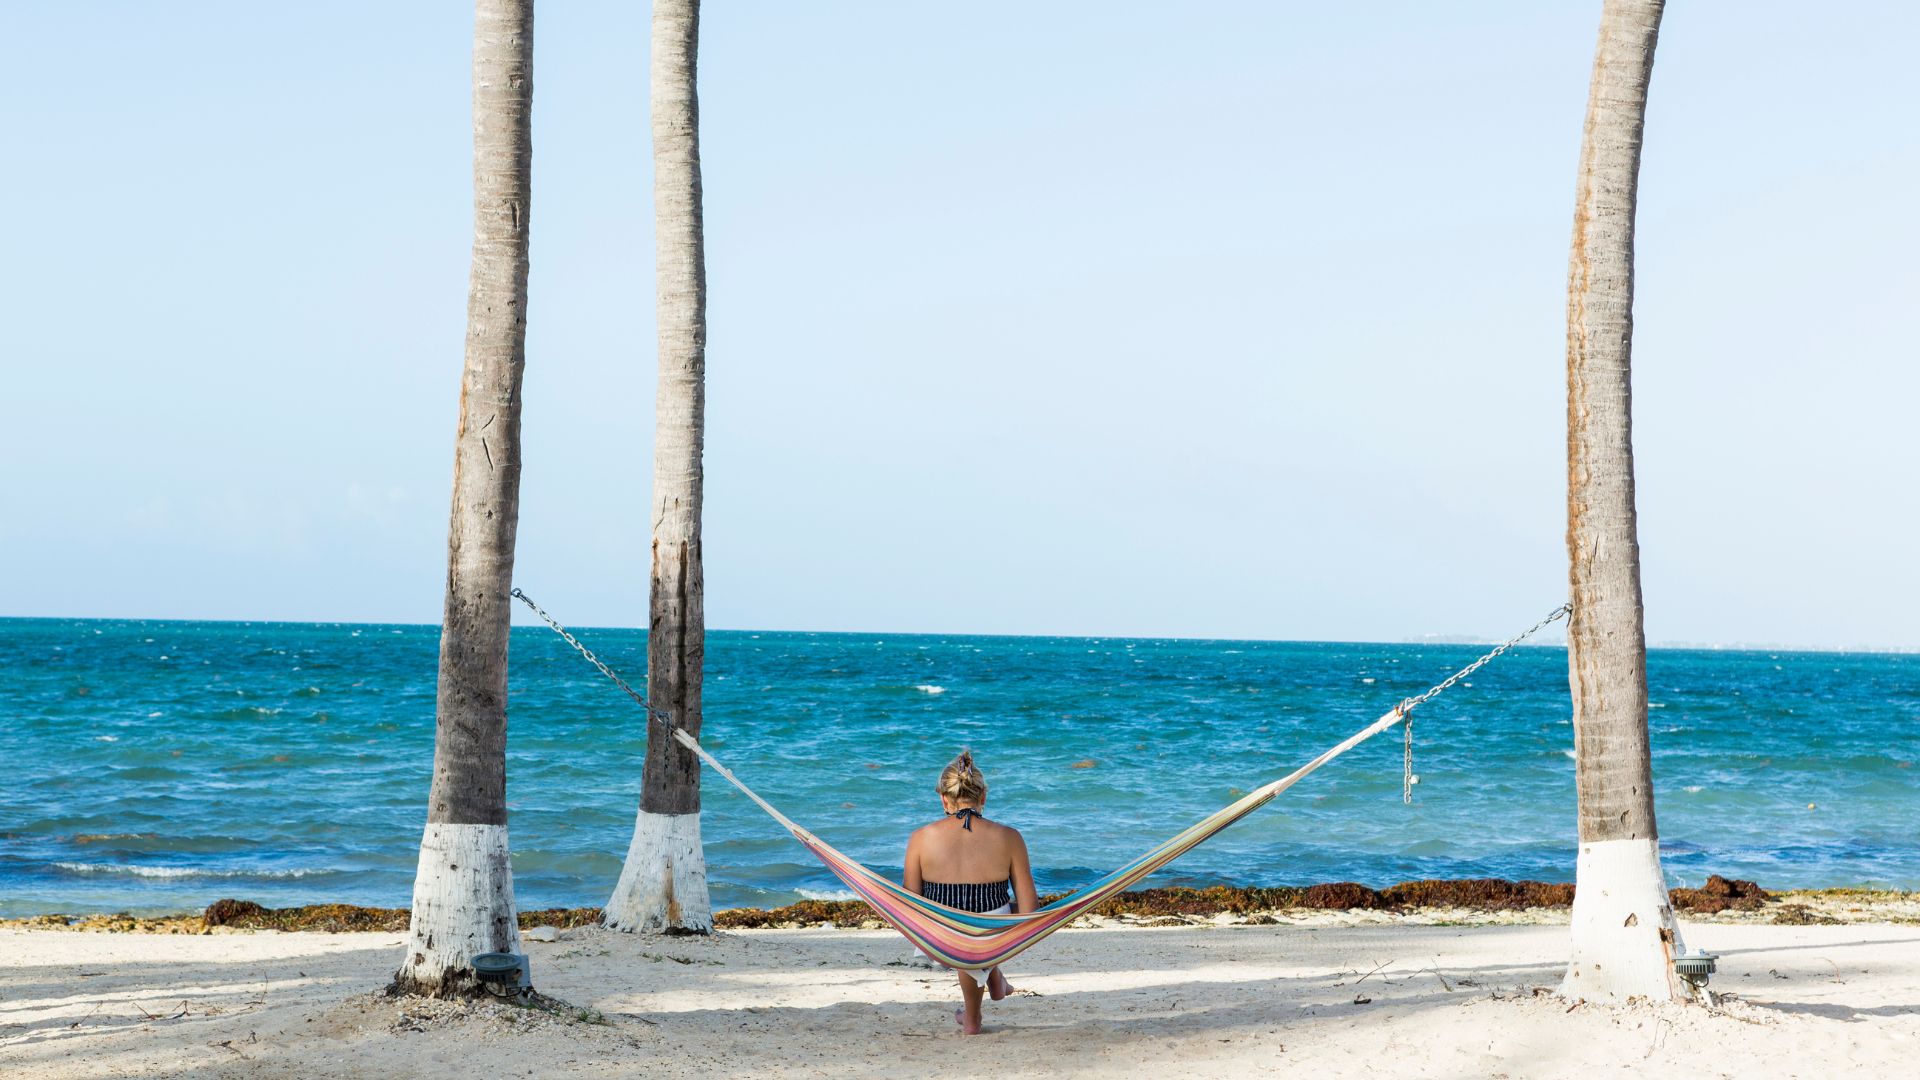 Back view of a woman, sitting on a hammock placed between two palm trees.